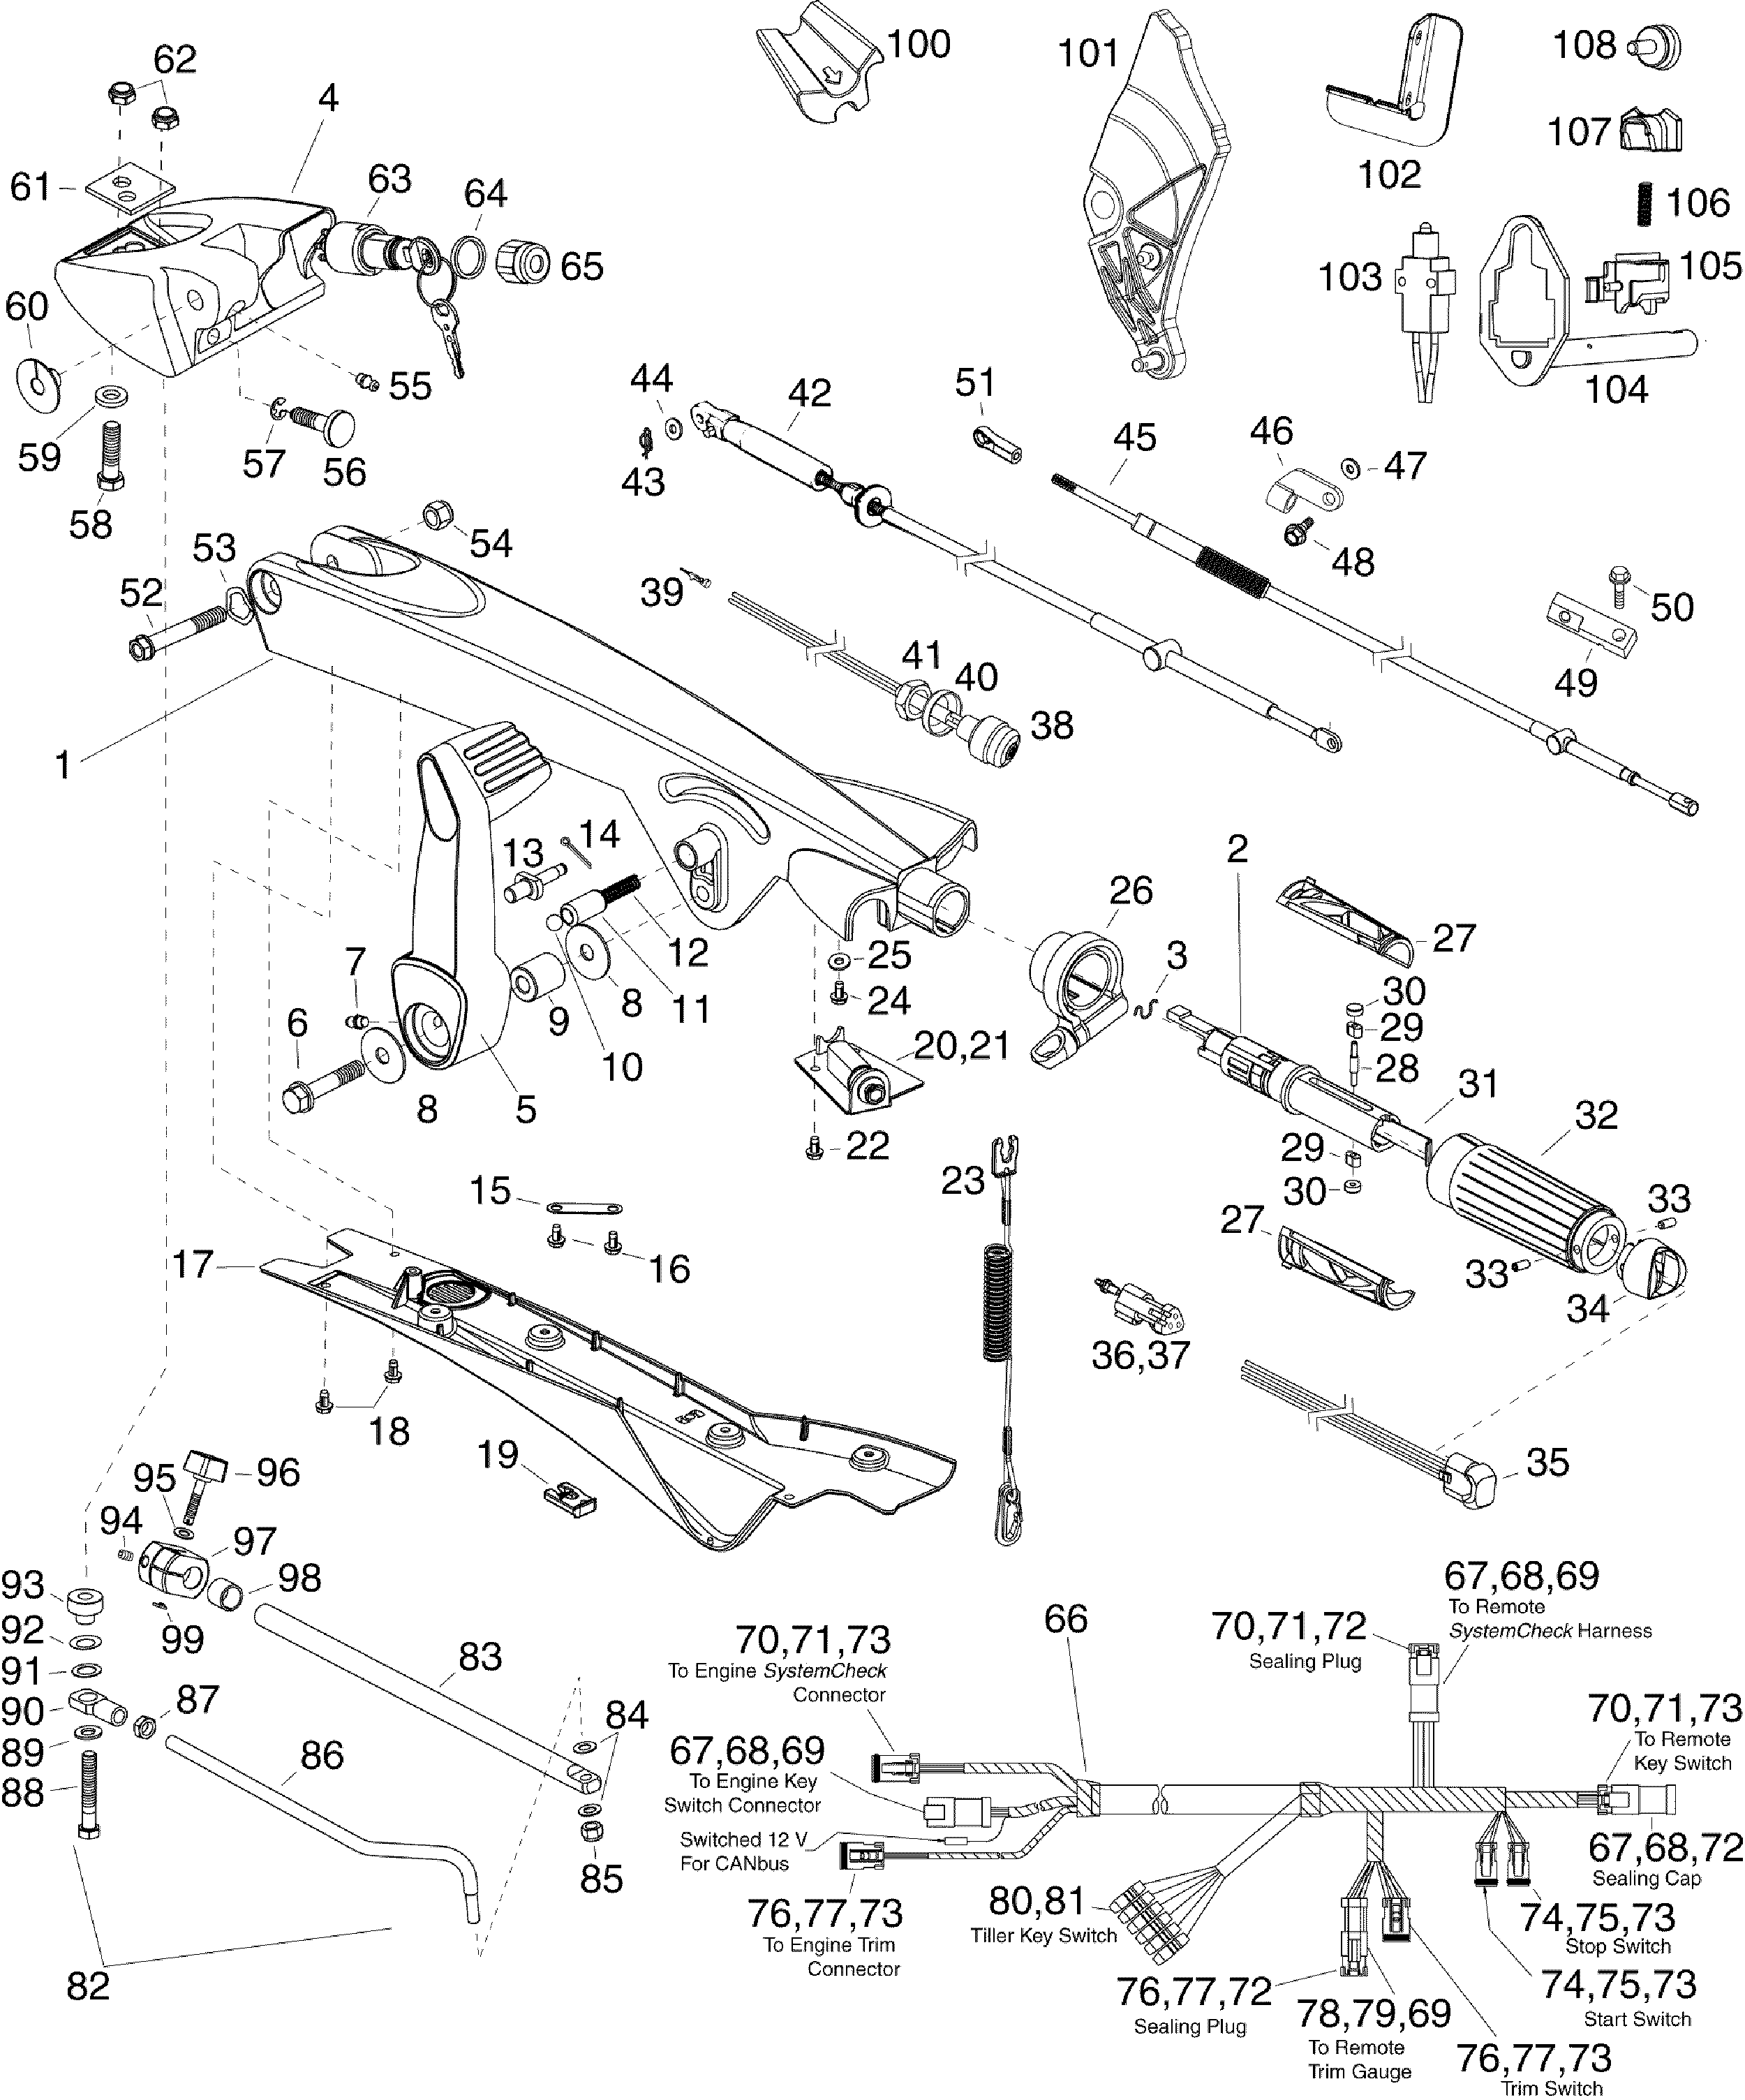 Outboard Motor Evinrude Ignition Switch Wiring Diagram from www.marineengine.com